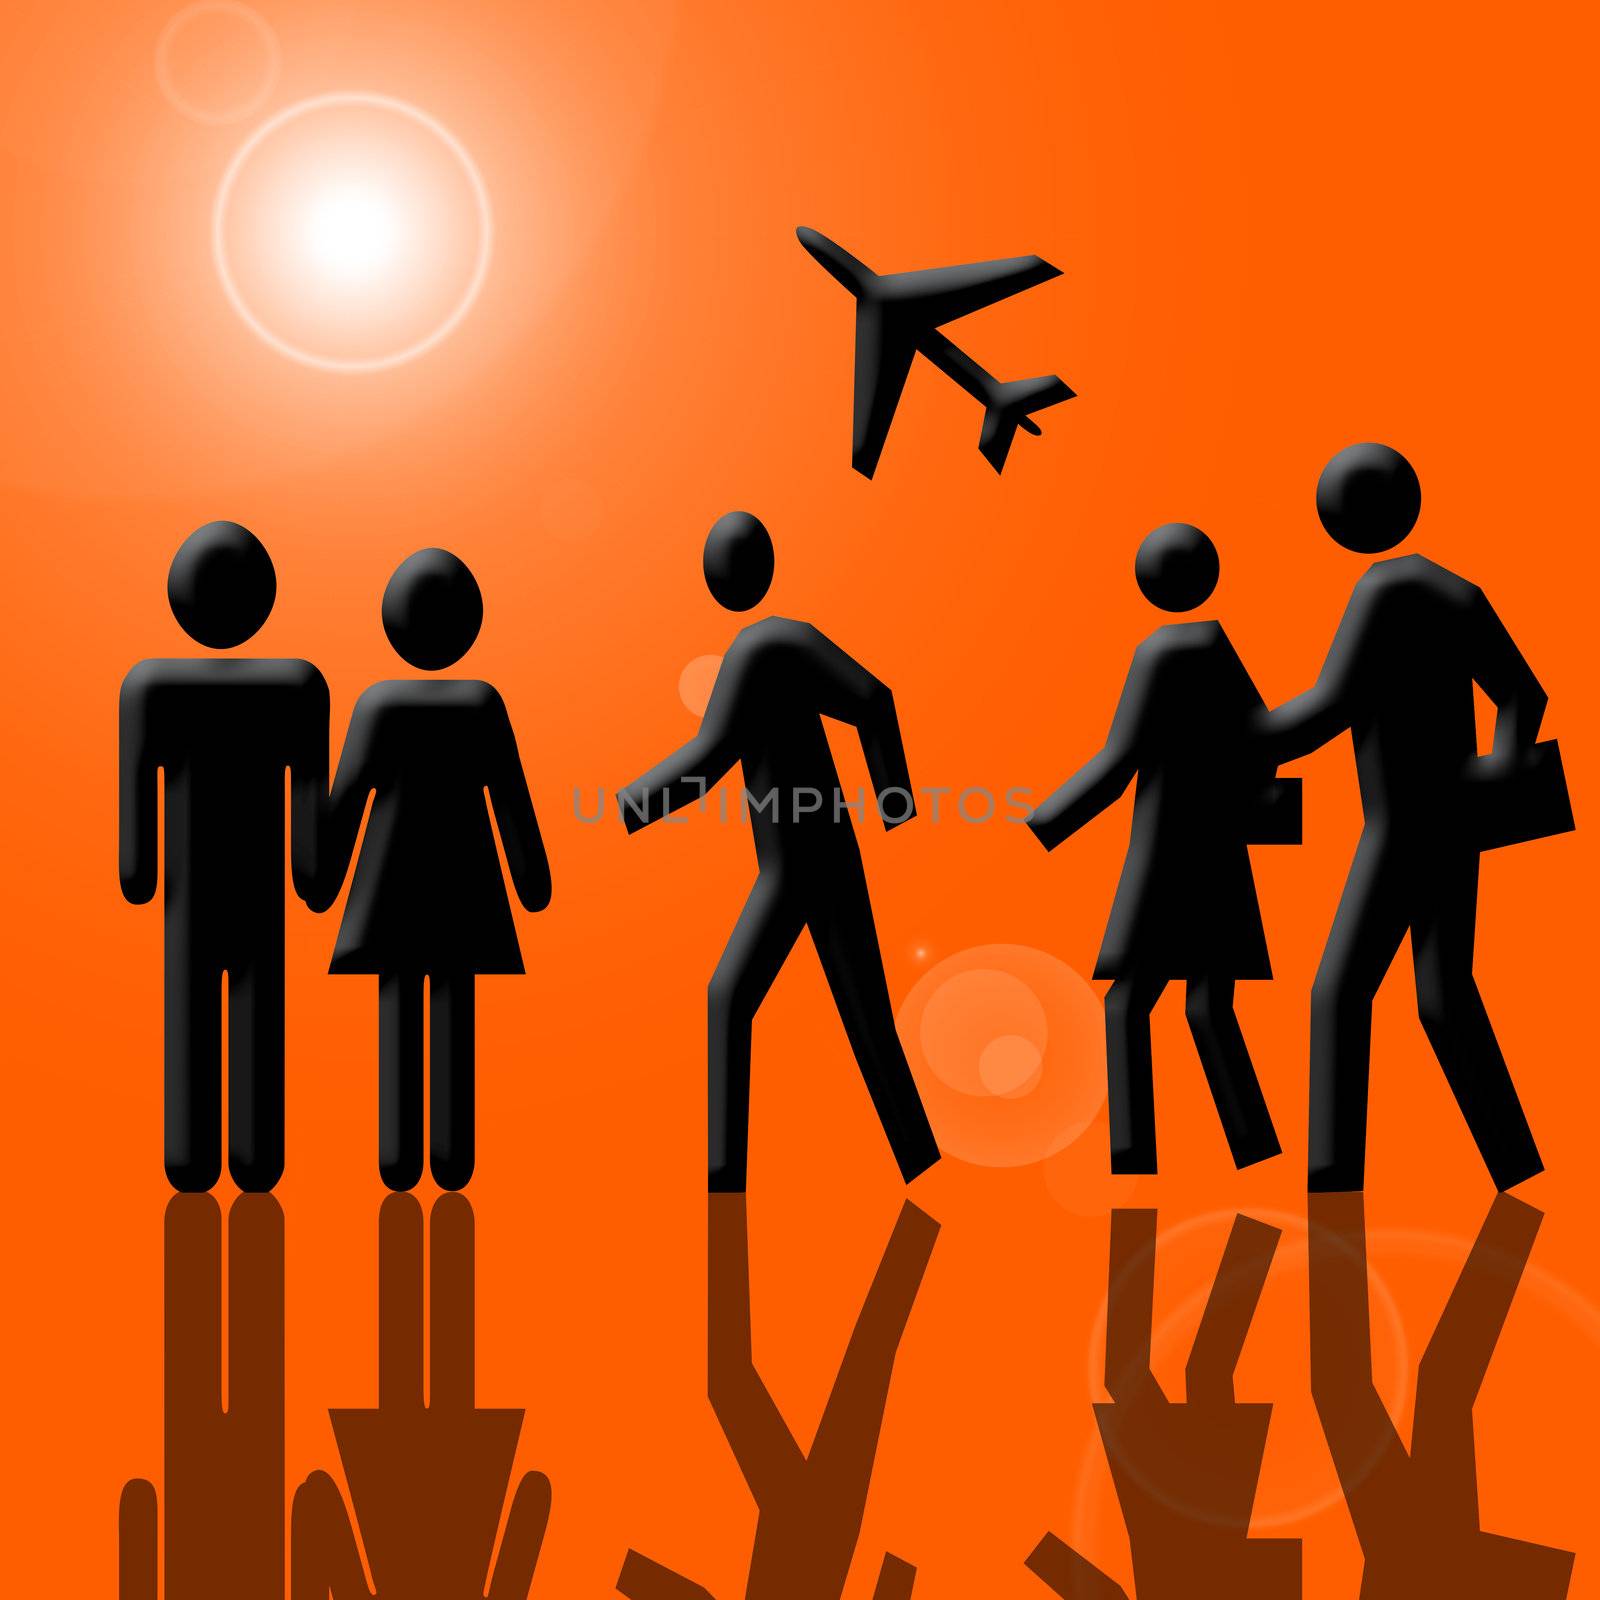 People and Airplane in Airport over Orange Background